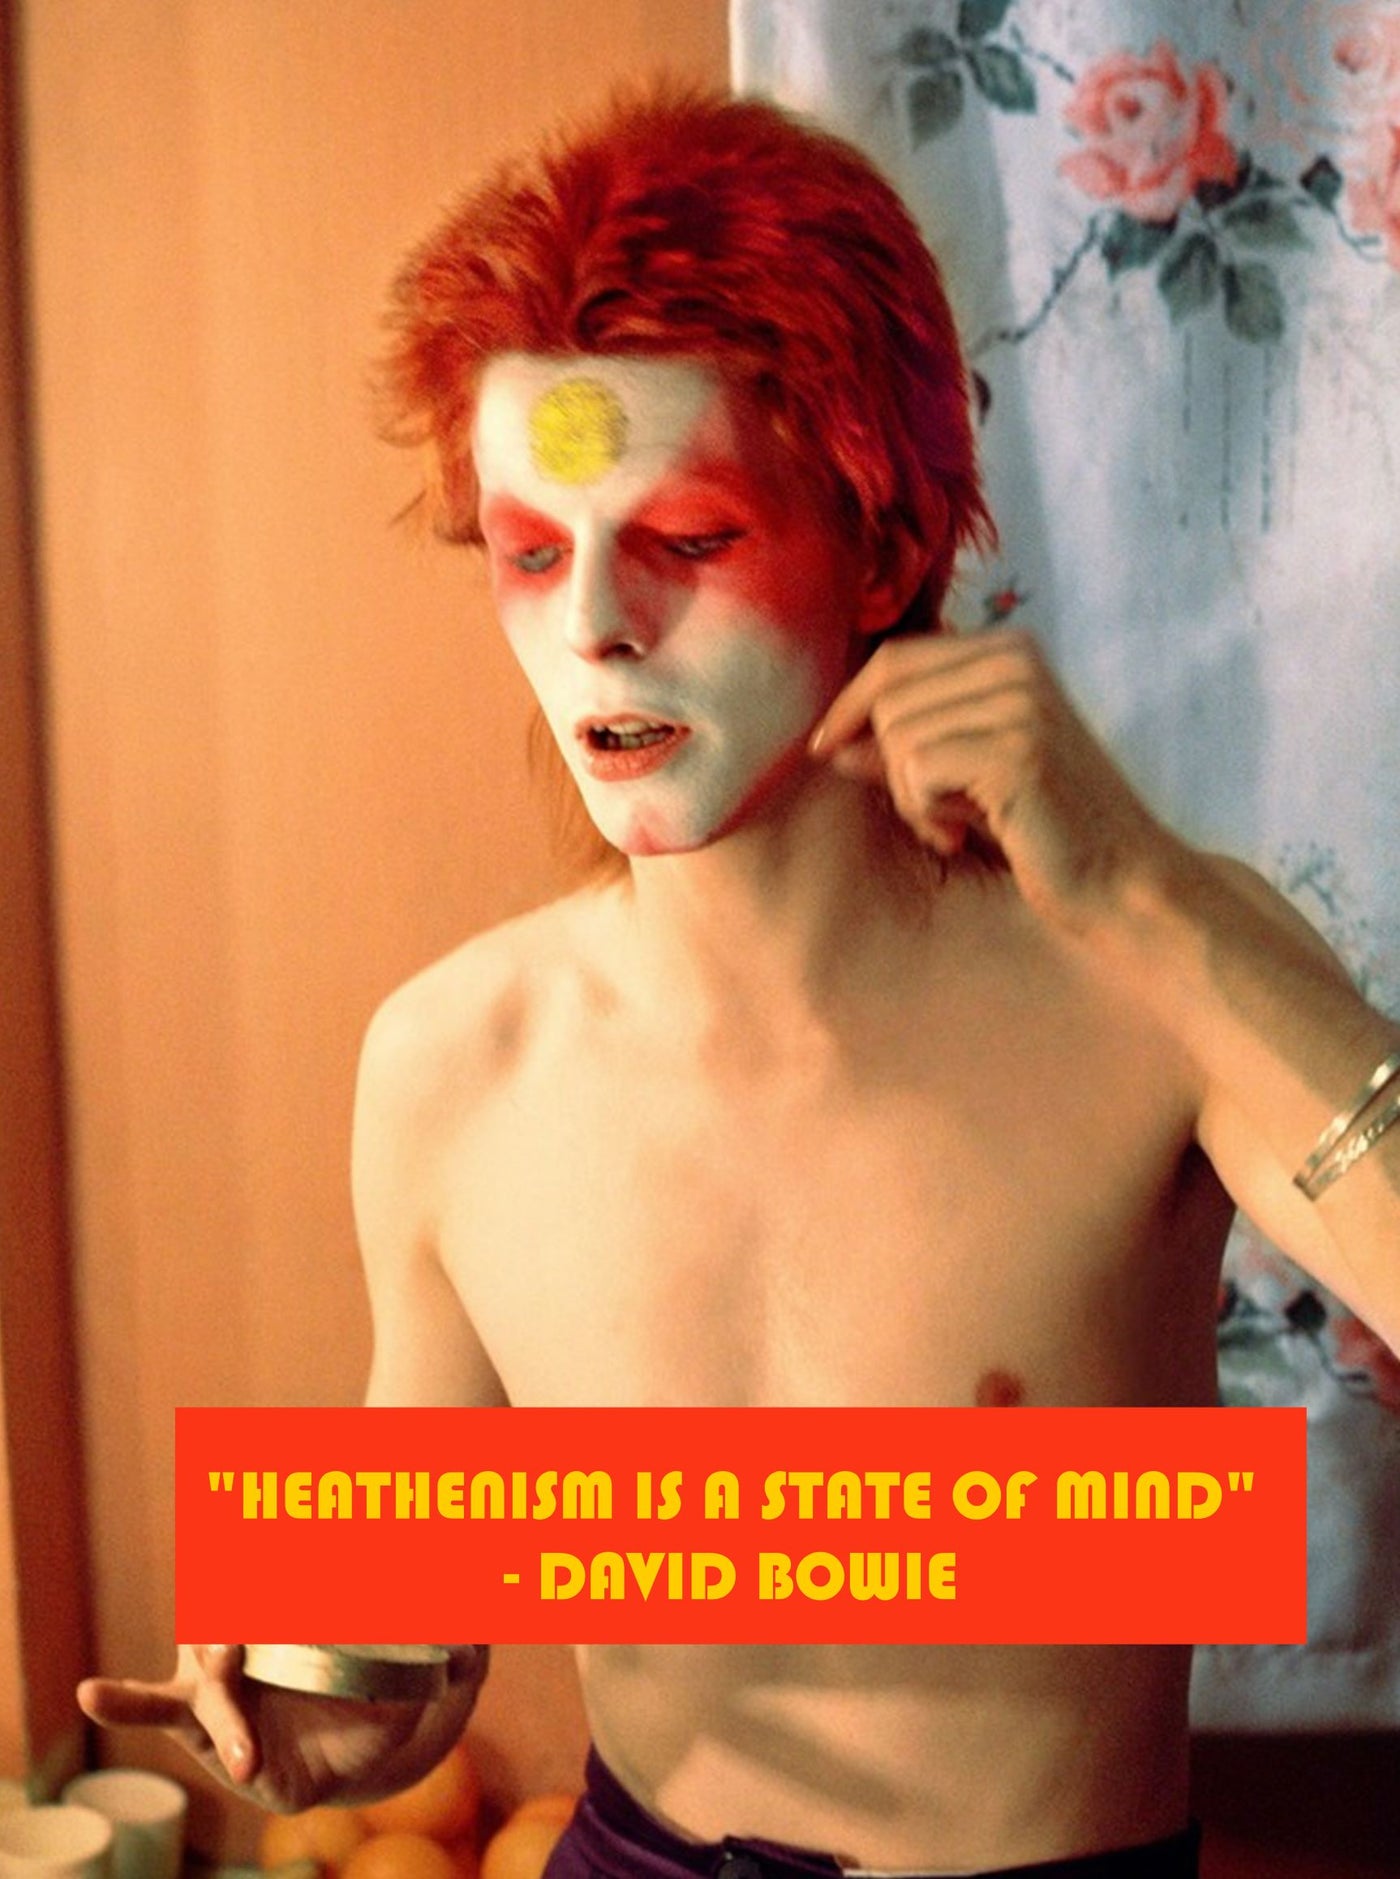 BOWIE QUOTES "Heathenism is a state of mind"